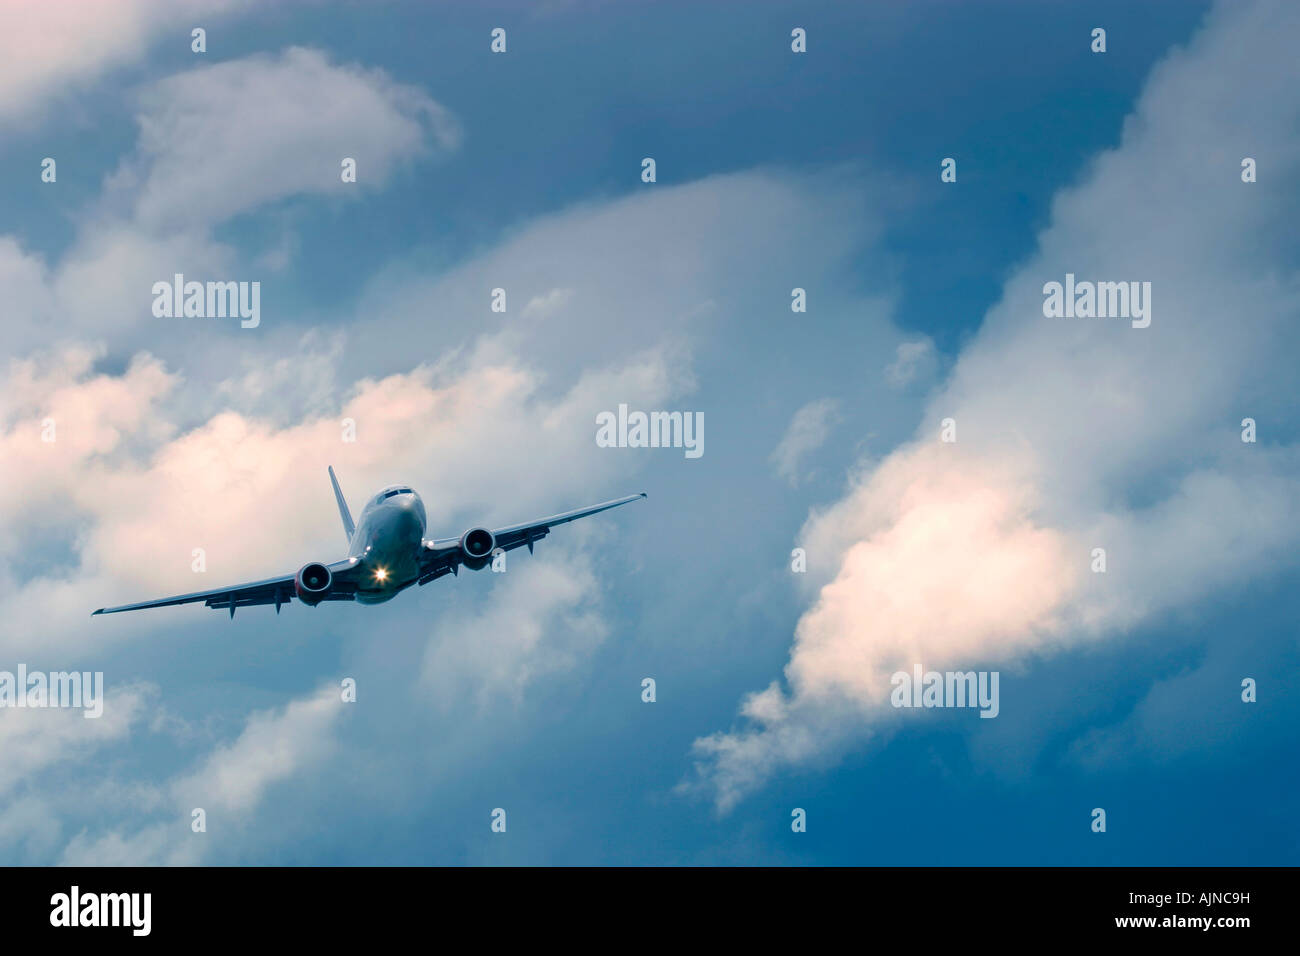 Commercial airplane during flight in the dramatic stormy clouds Stock Photo